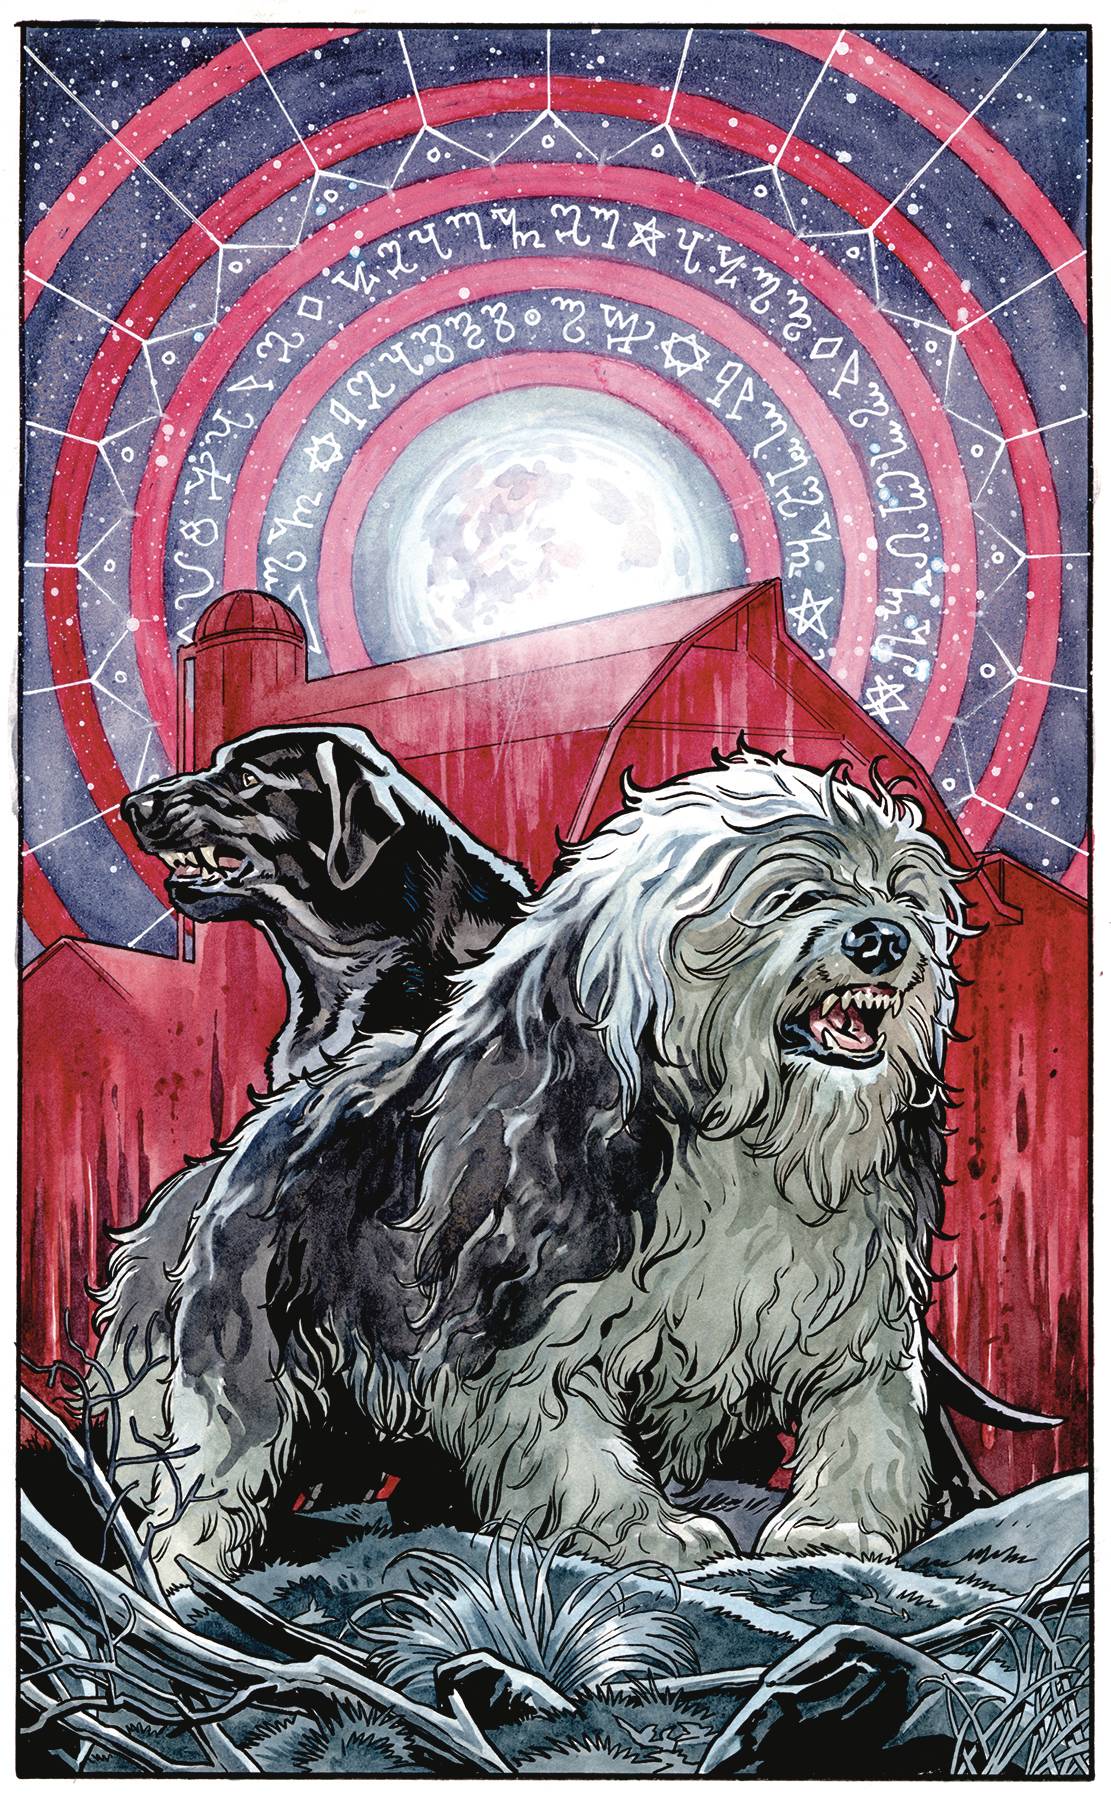 Beasts of Burden Wise Dogs And Eldritch Men #2 Cover A Dewey (Of 4)